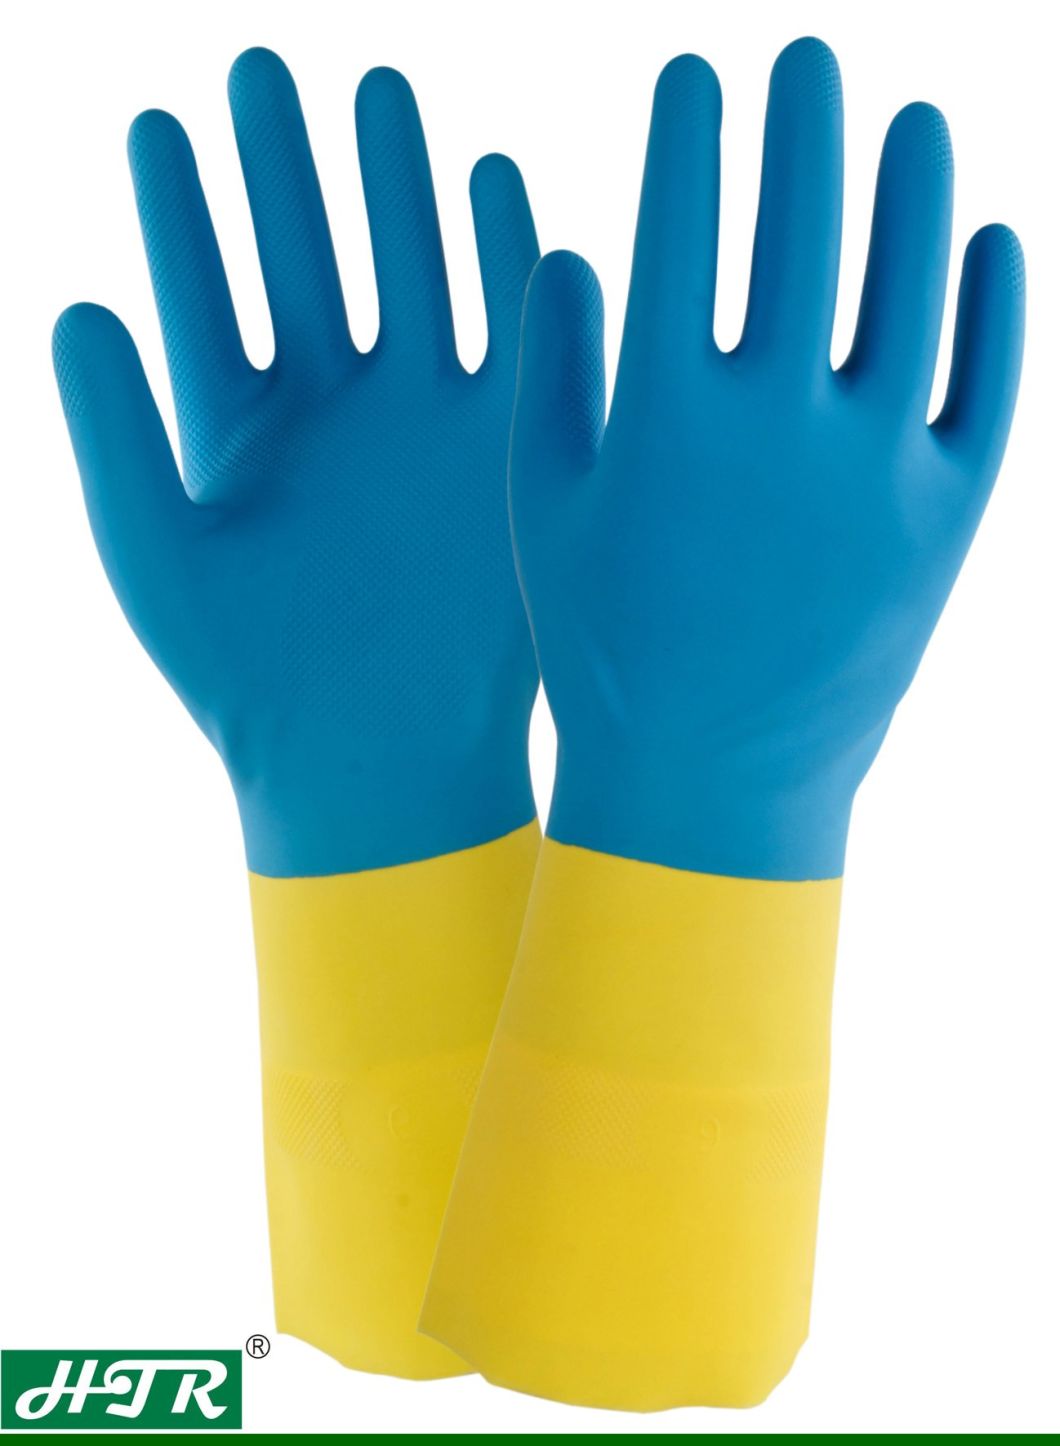 Synthestic Rubber Diamond Texture Chemical Resistant Cotton Liner Work Gloves